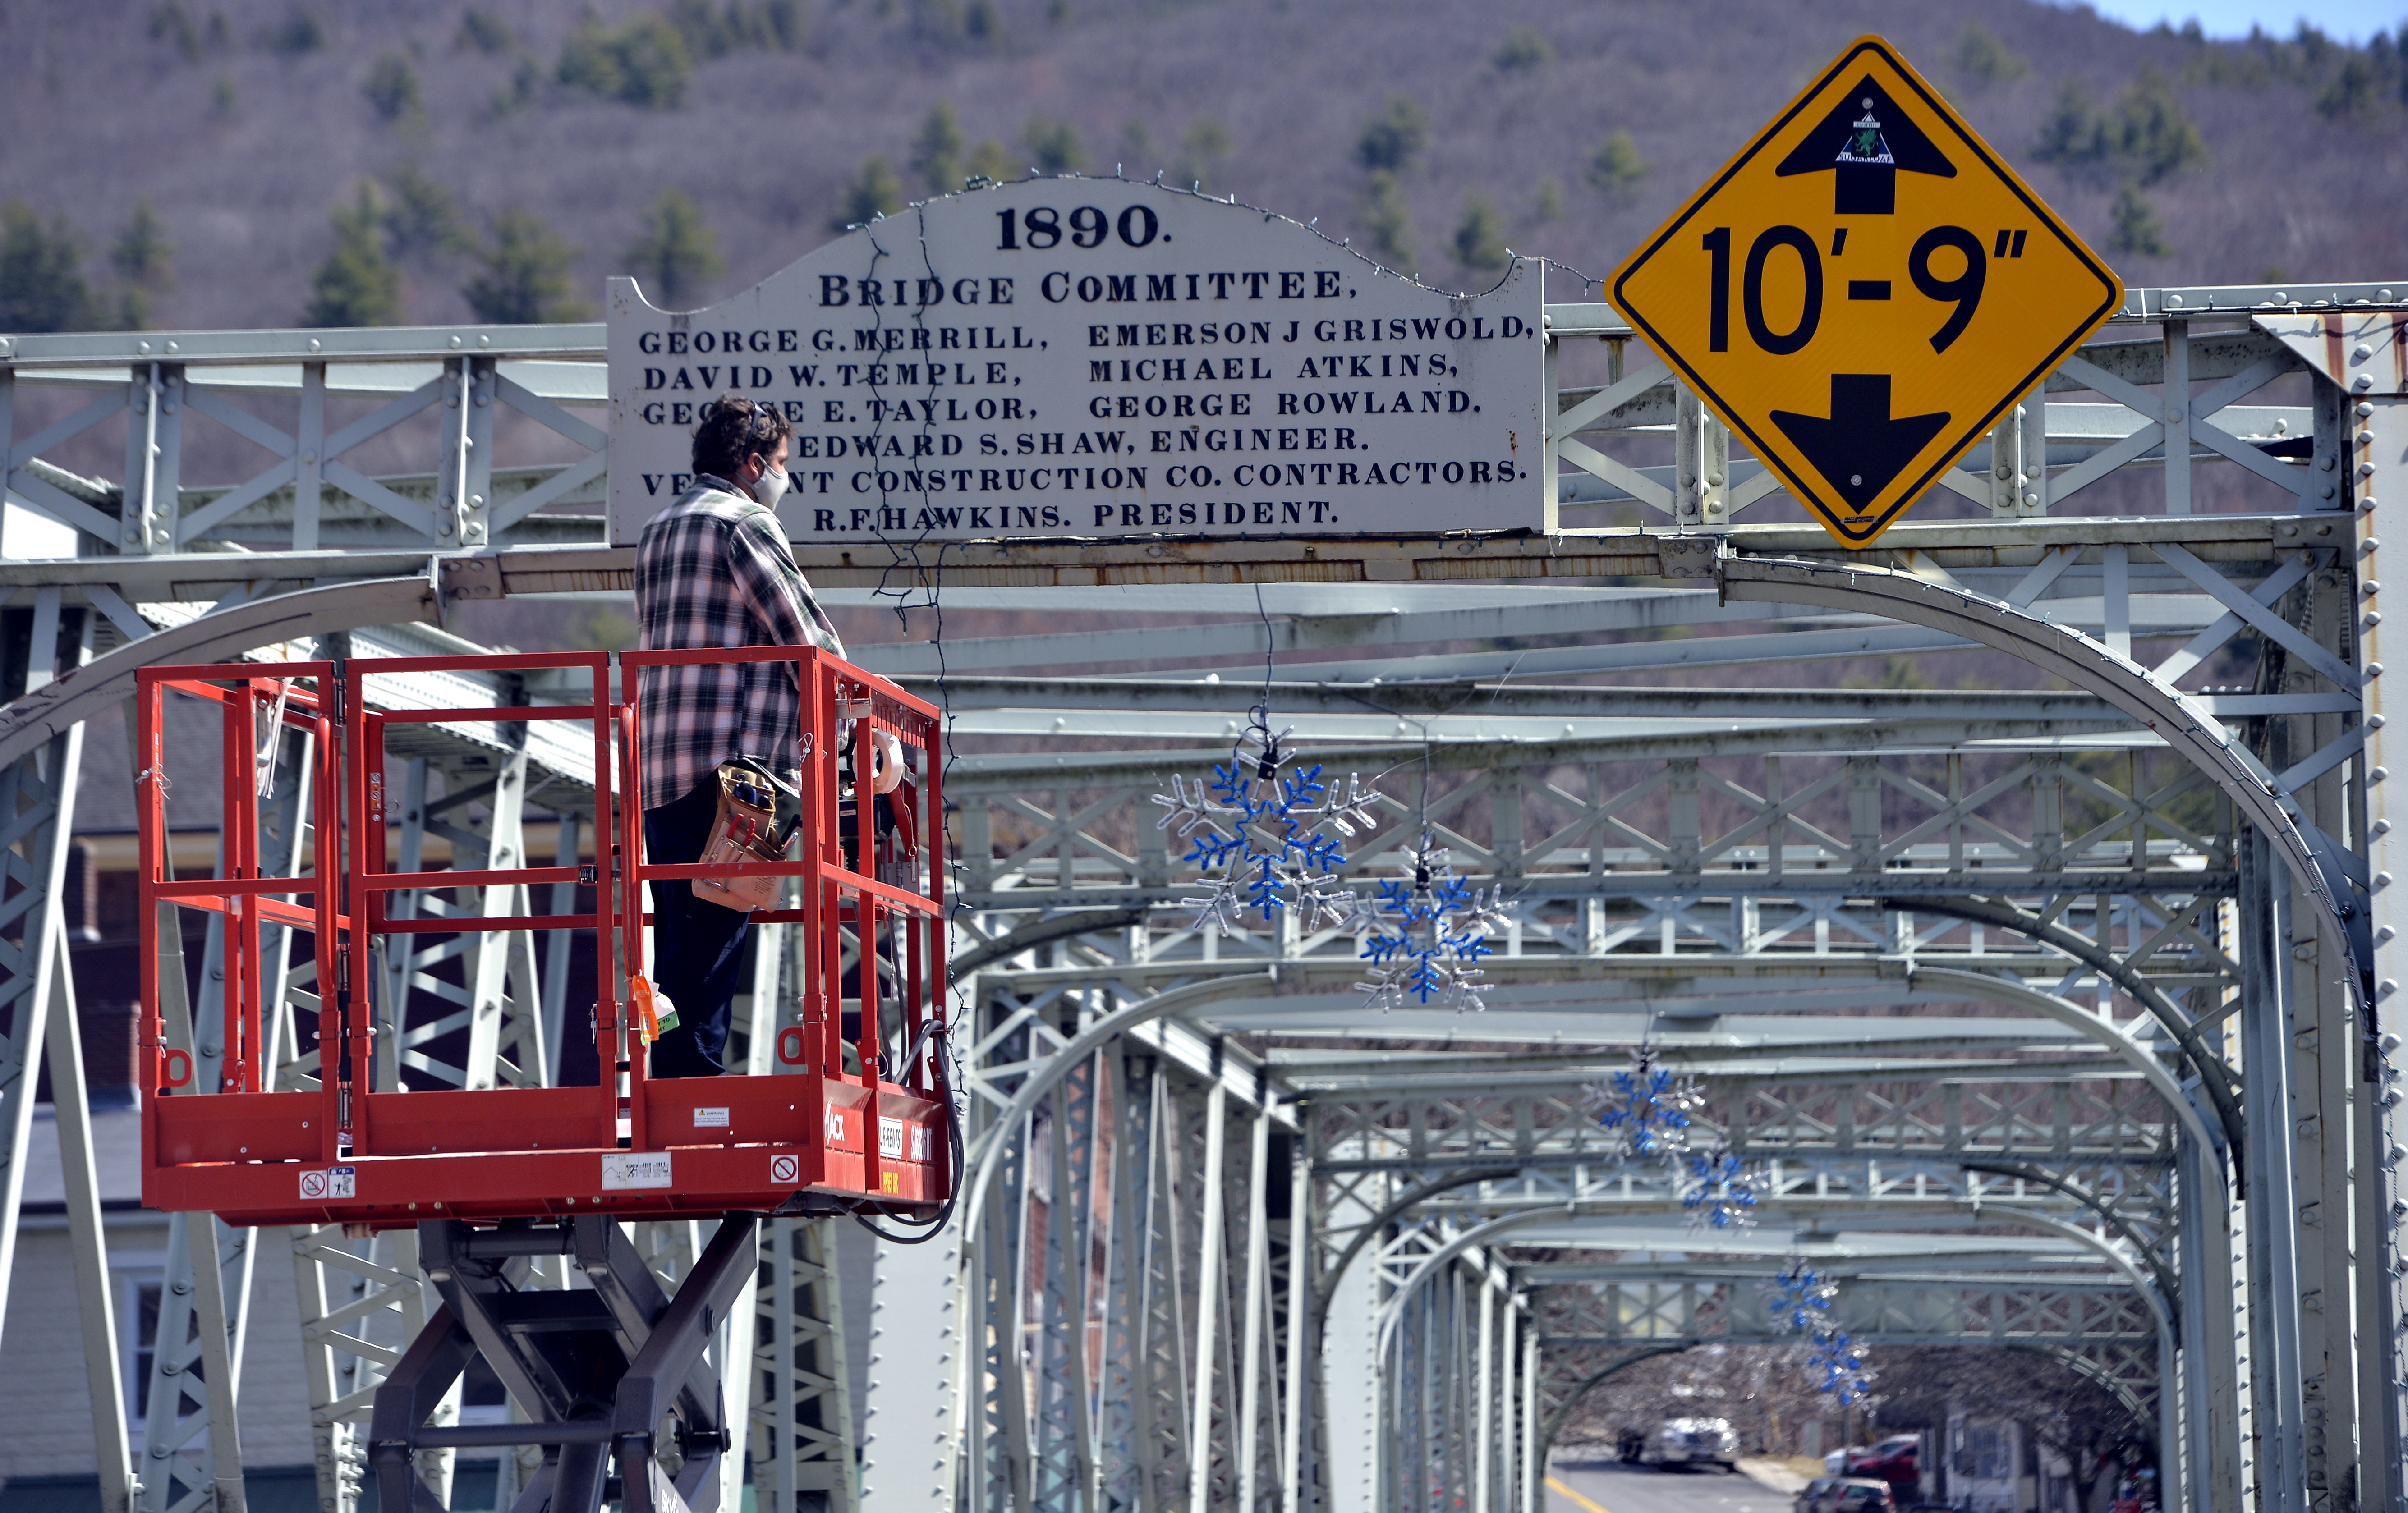 Christmas Lights are being hung on the iron bridge between downtown Shelburne Falls and Buckland as the town transforms into a winter scene for the filming of the show Dexter, April 7, 2021.   (Don Treeger / The Republican)